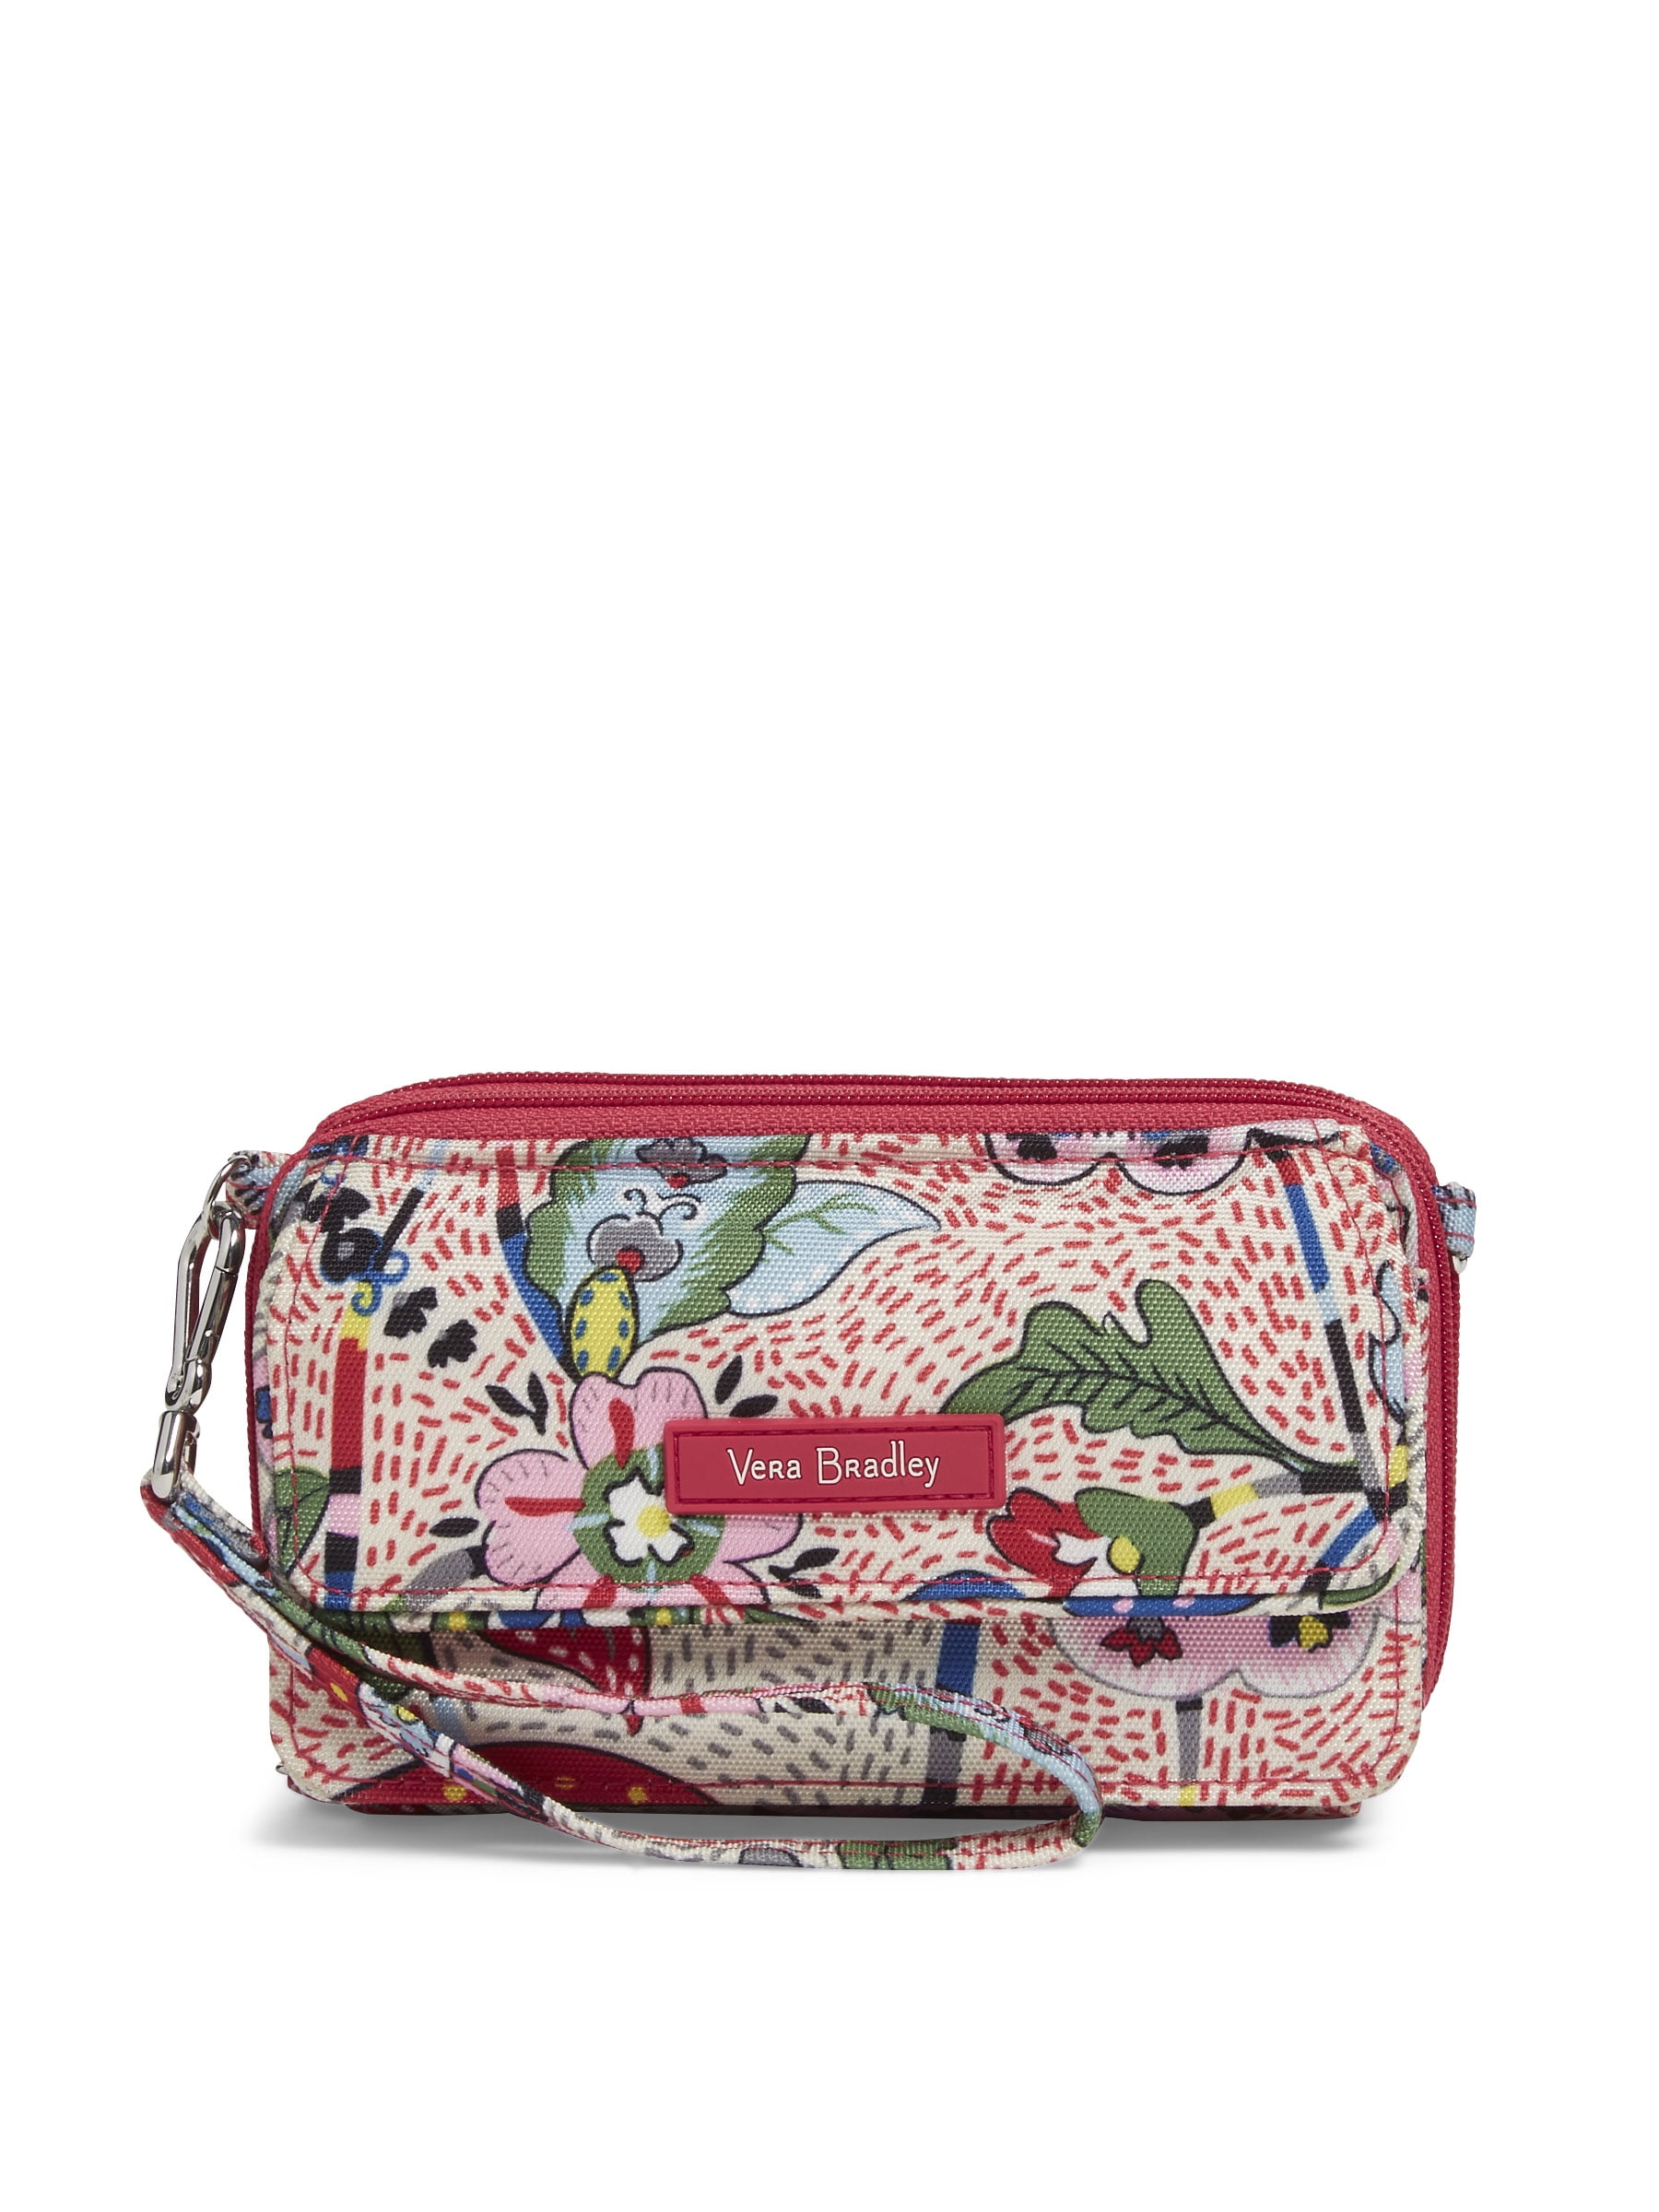 Vera Bradley Lighten Up All in One Crossbody Purse with RFID Protection 